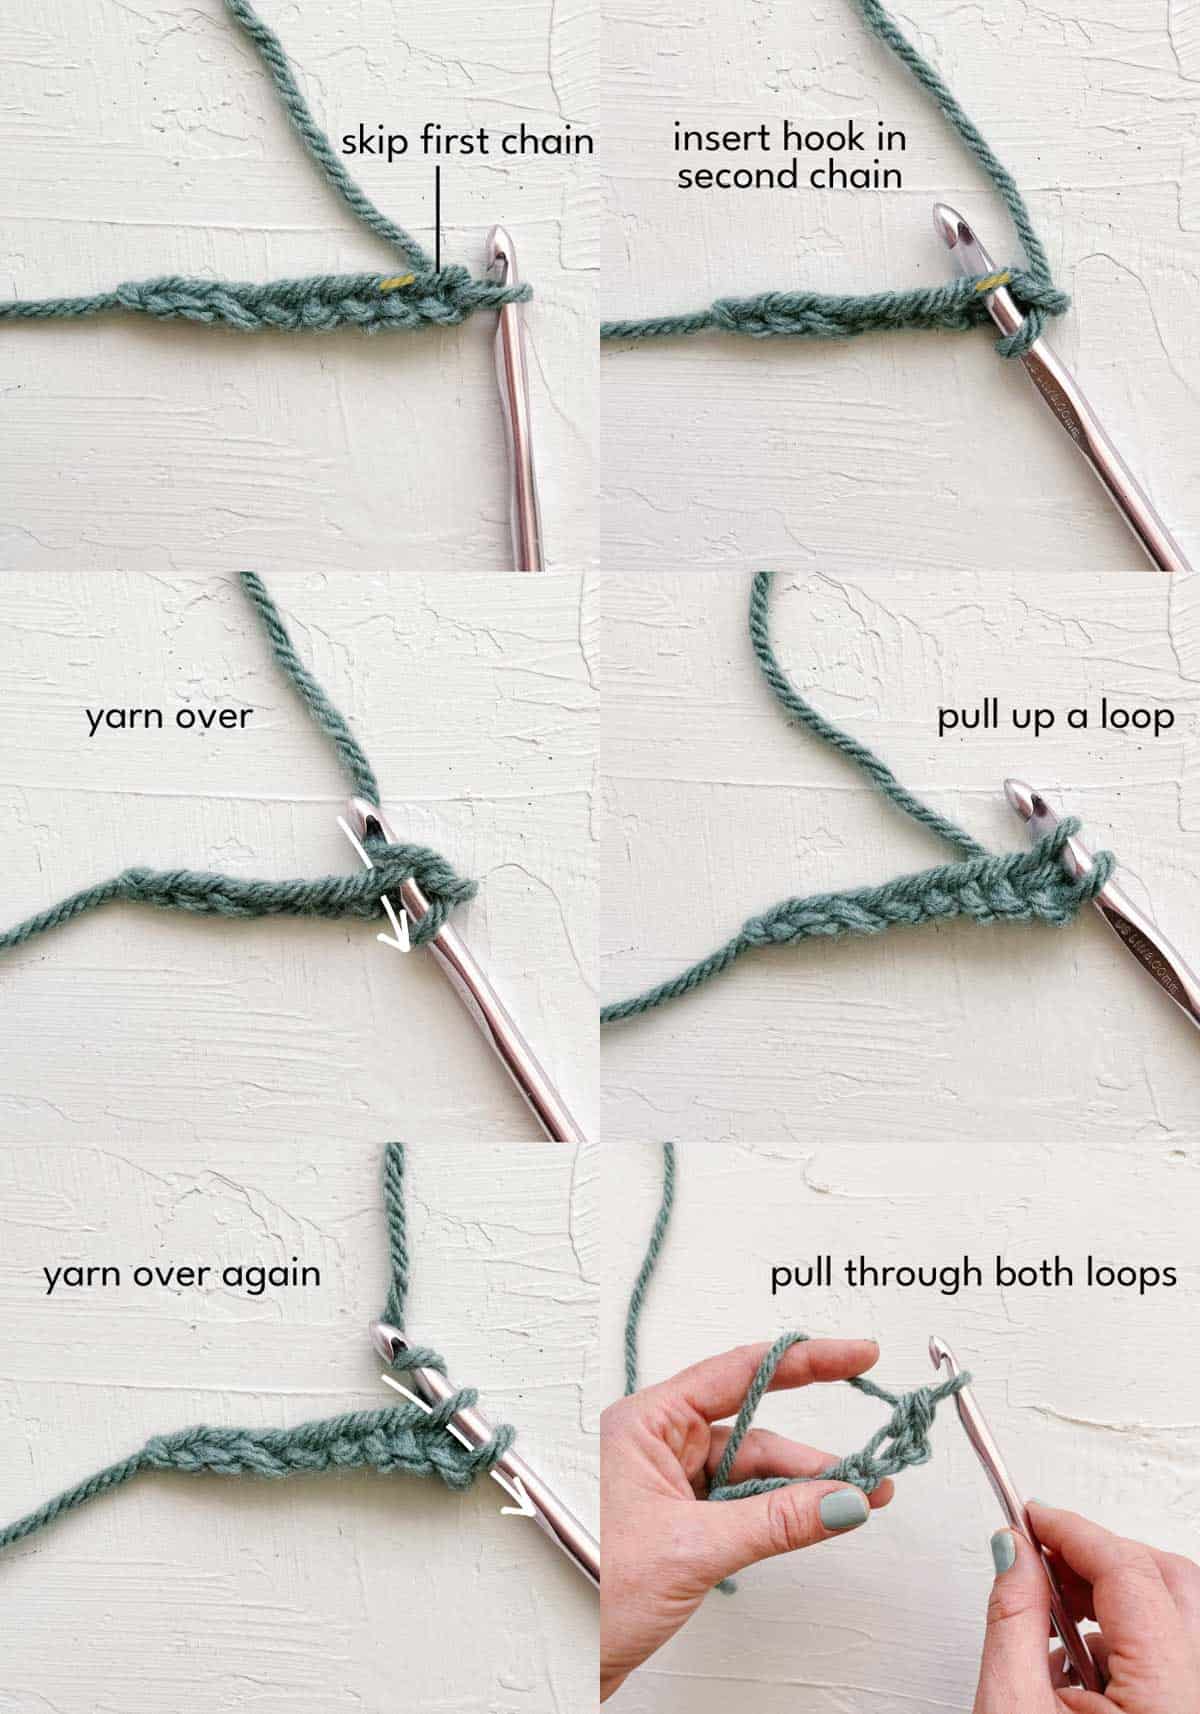 How to single crochet step by step tutorial.